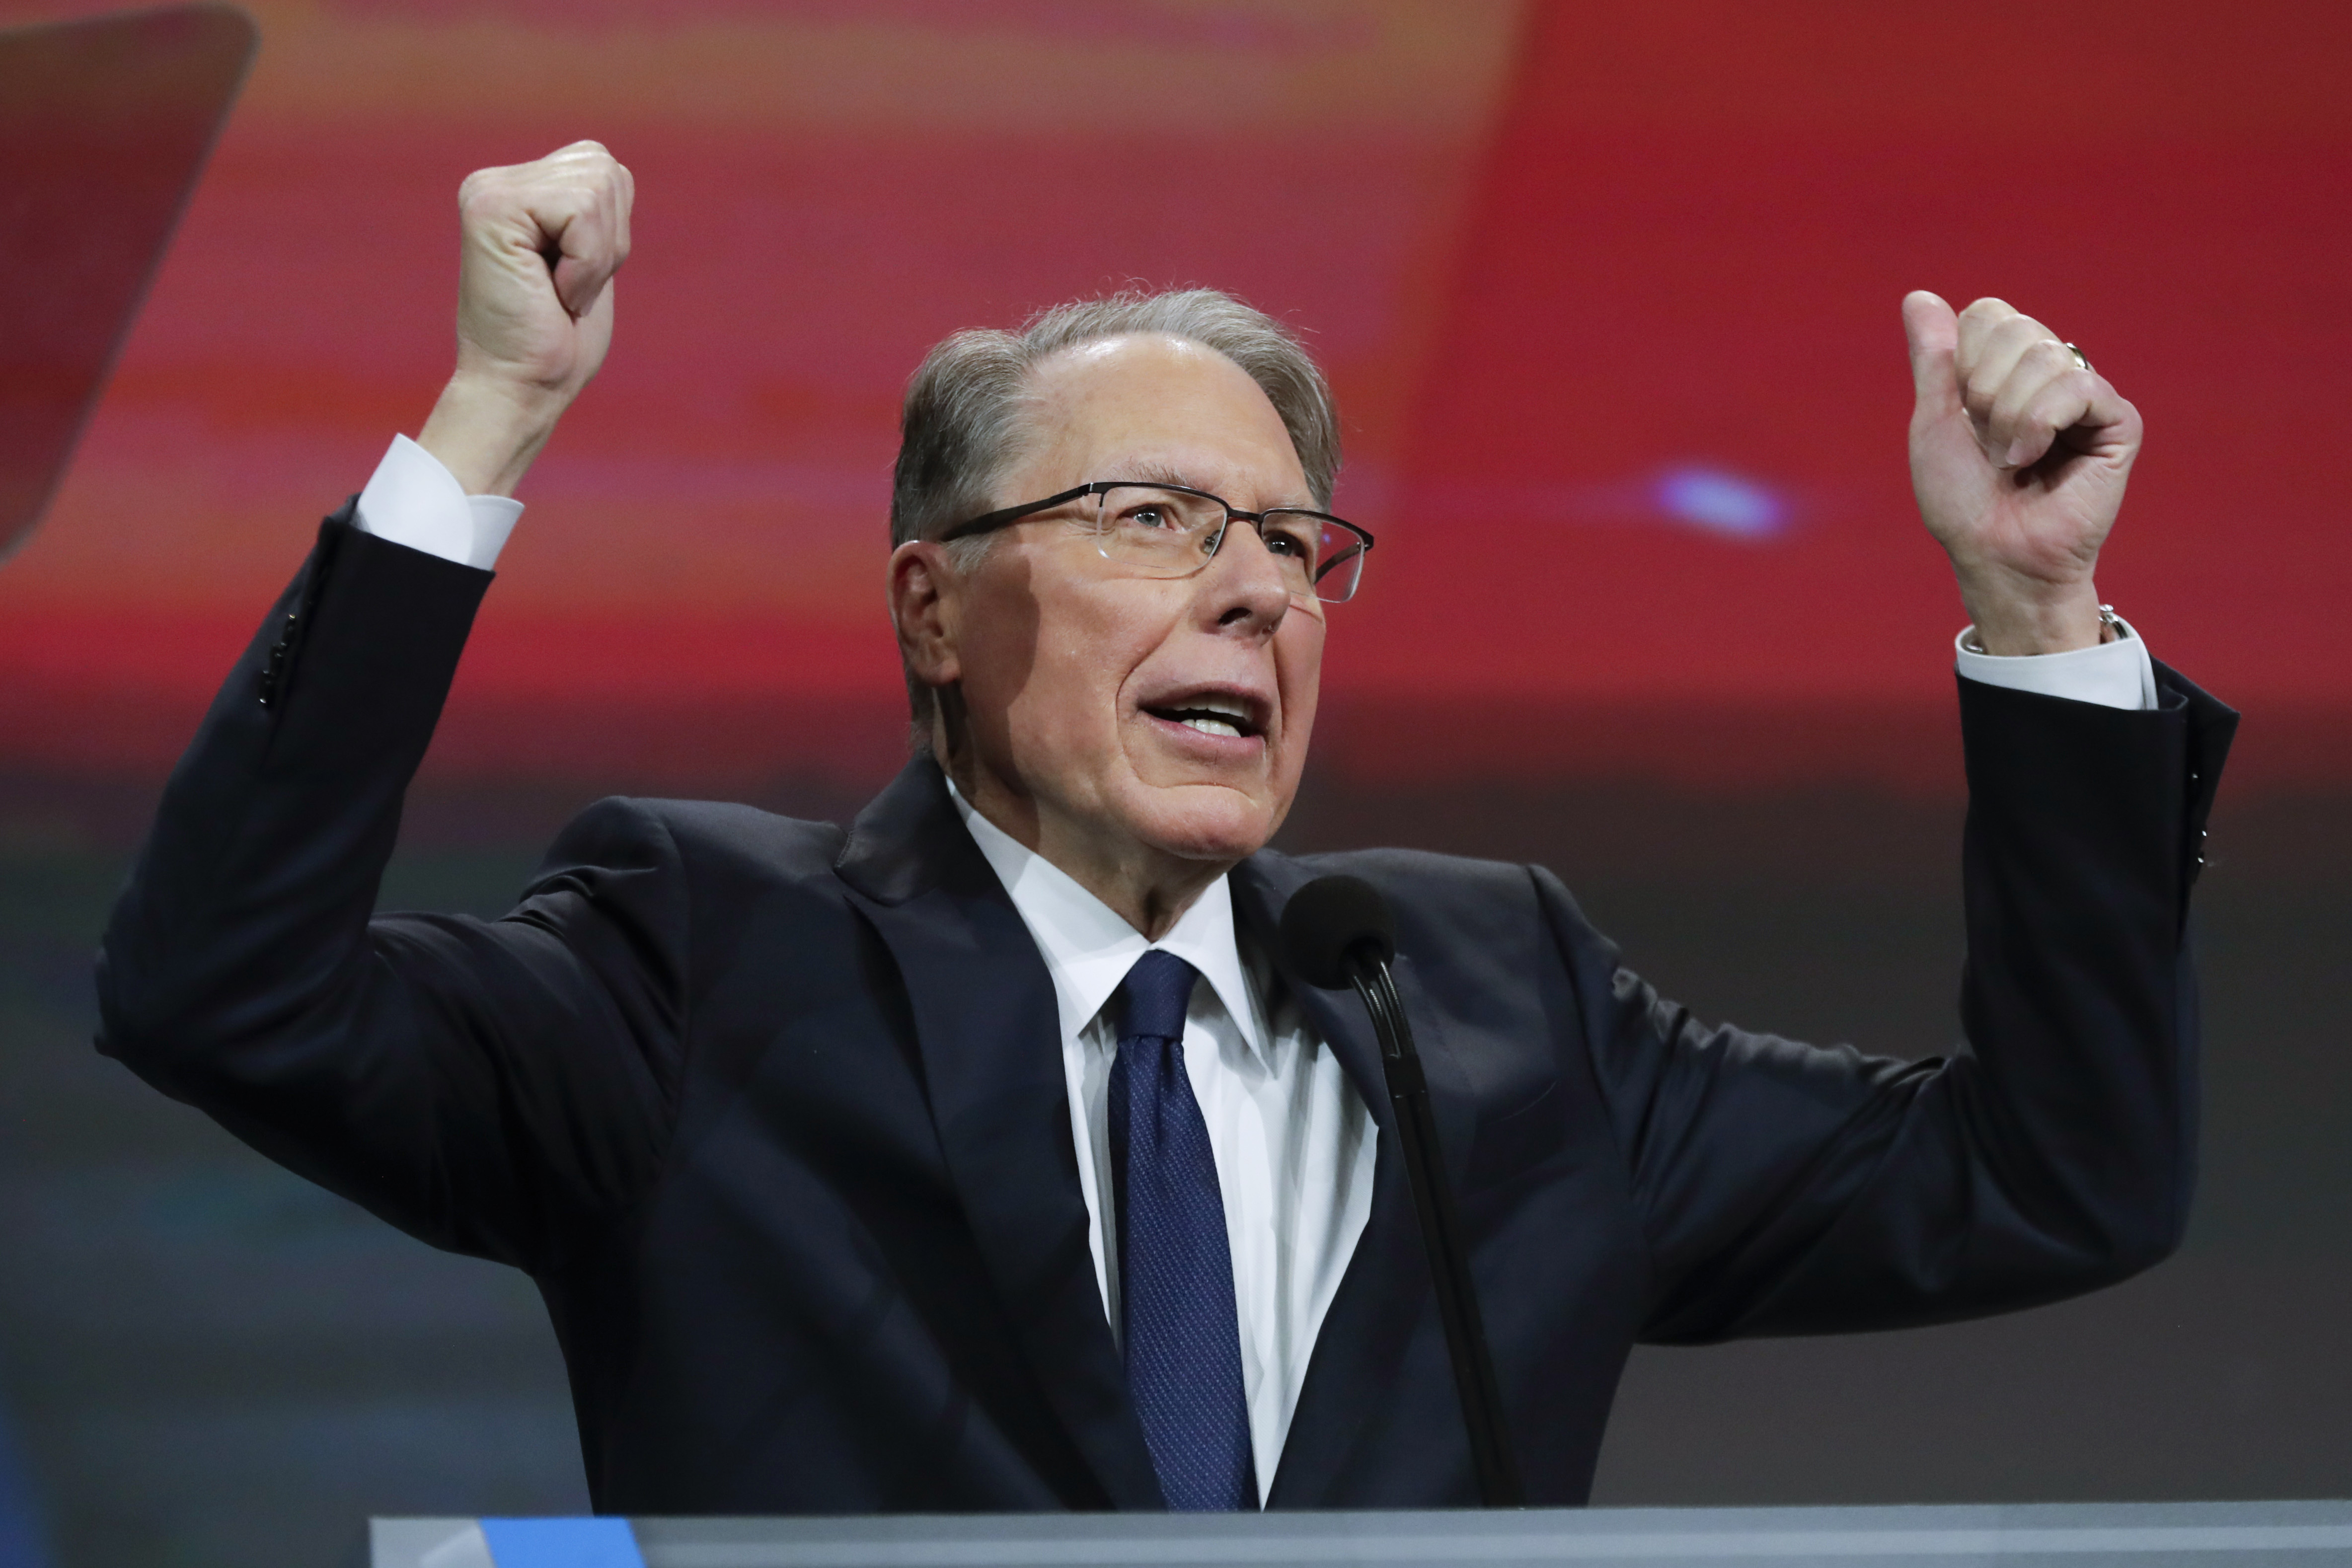 National Rifle Association Executive Vice President and CEO Wayne LaPierre speaks at the NRA Annual Meeting of Members in Indianapolis, Saturday, April 27, 2019. The NRA sued its longtime public relations firm, accusing it of engineering a failed “coup” attempt to undermine the NRA's leadership. (Michael Conroy—AP)